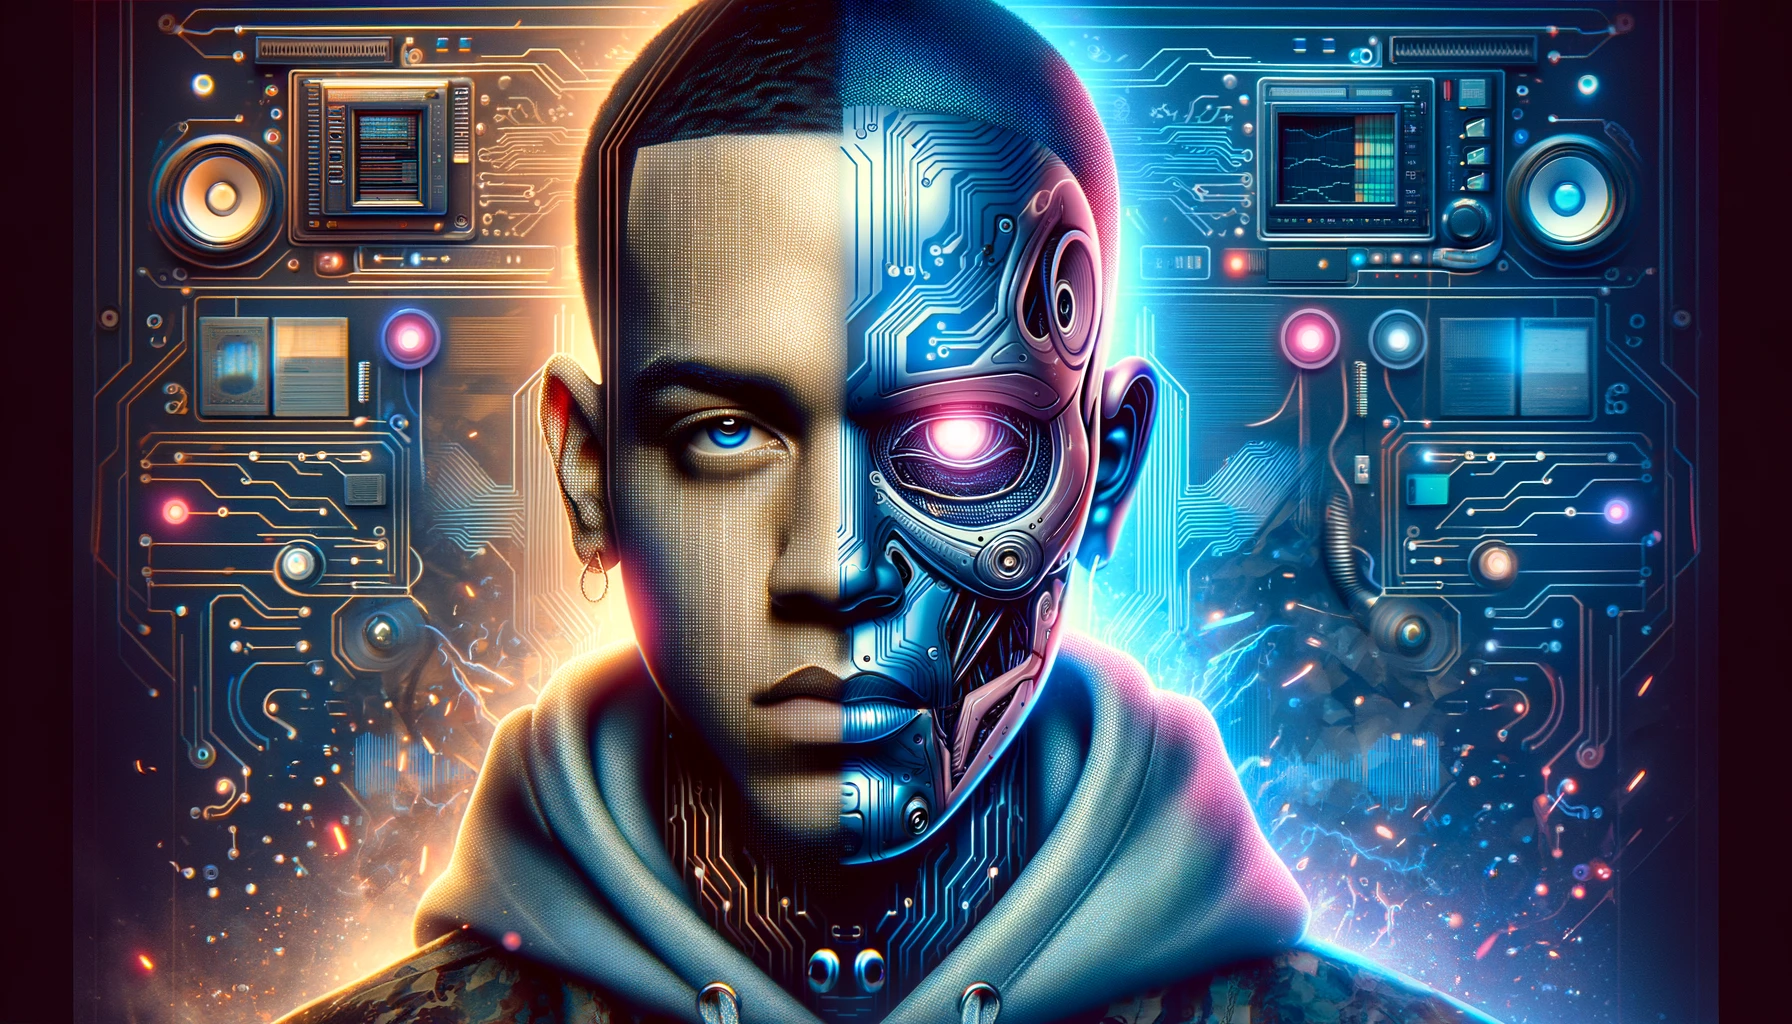 A horizontal image depicting a famous rapper morphing into an AI. One half of the rapper's face is human, while the other half transitions into a digital or robotic form, with circuit patterns, digital effects, and glowing lines emphasizing the transformation. The background is a blend of urban and futuristic themes, reflecting both the rapper's roots and the advanced nature of AI technology.